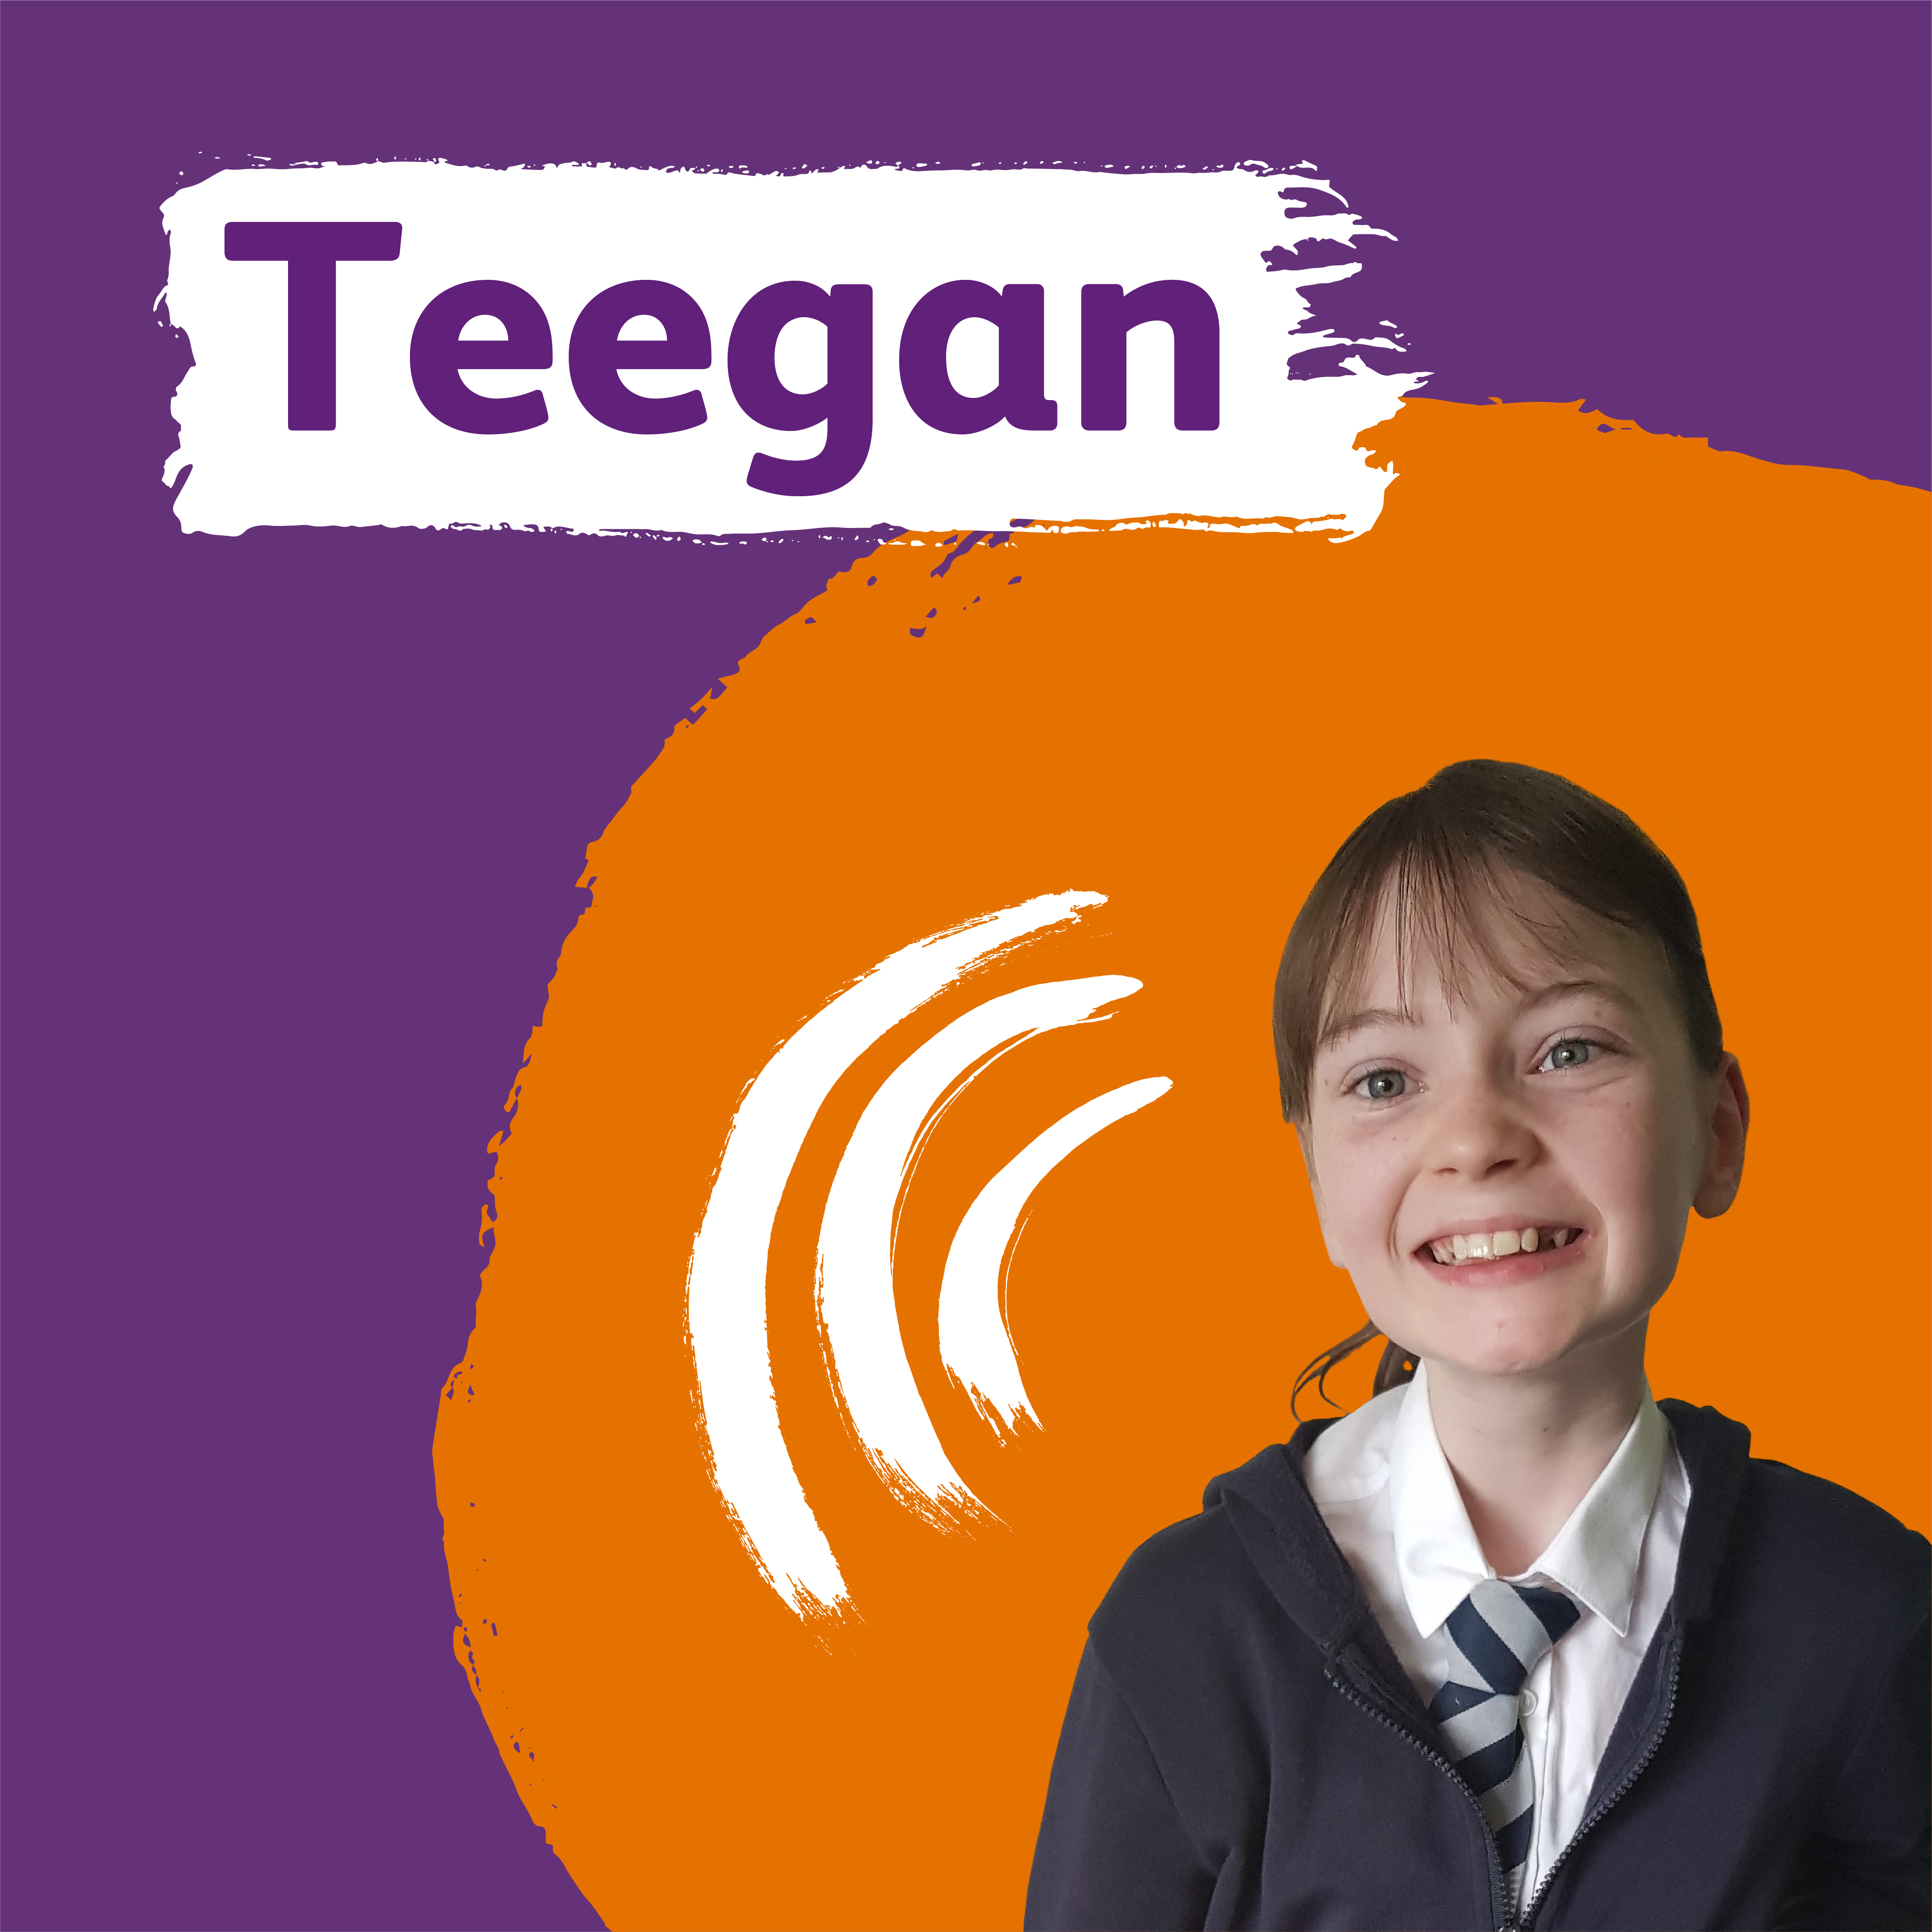 Teegan - A girl in a school uniform and her hair in a ponytail smiles. The name Teegan is written above her